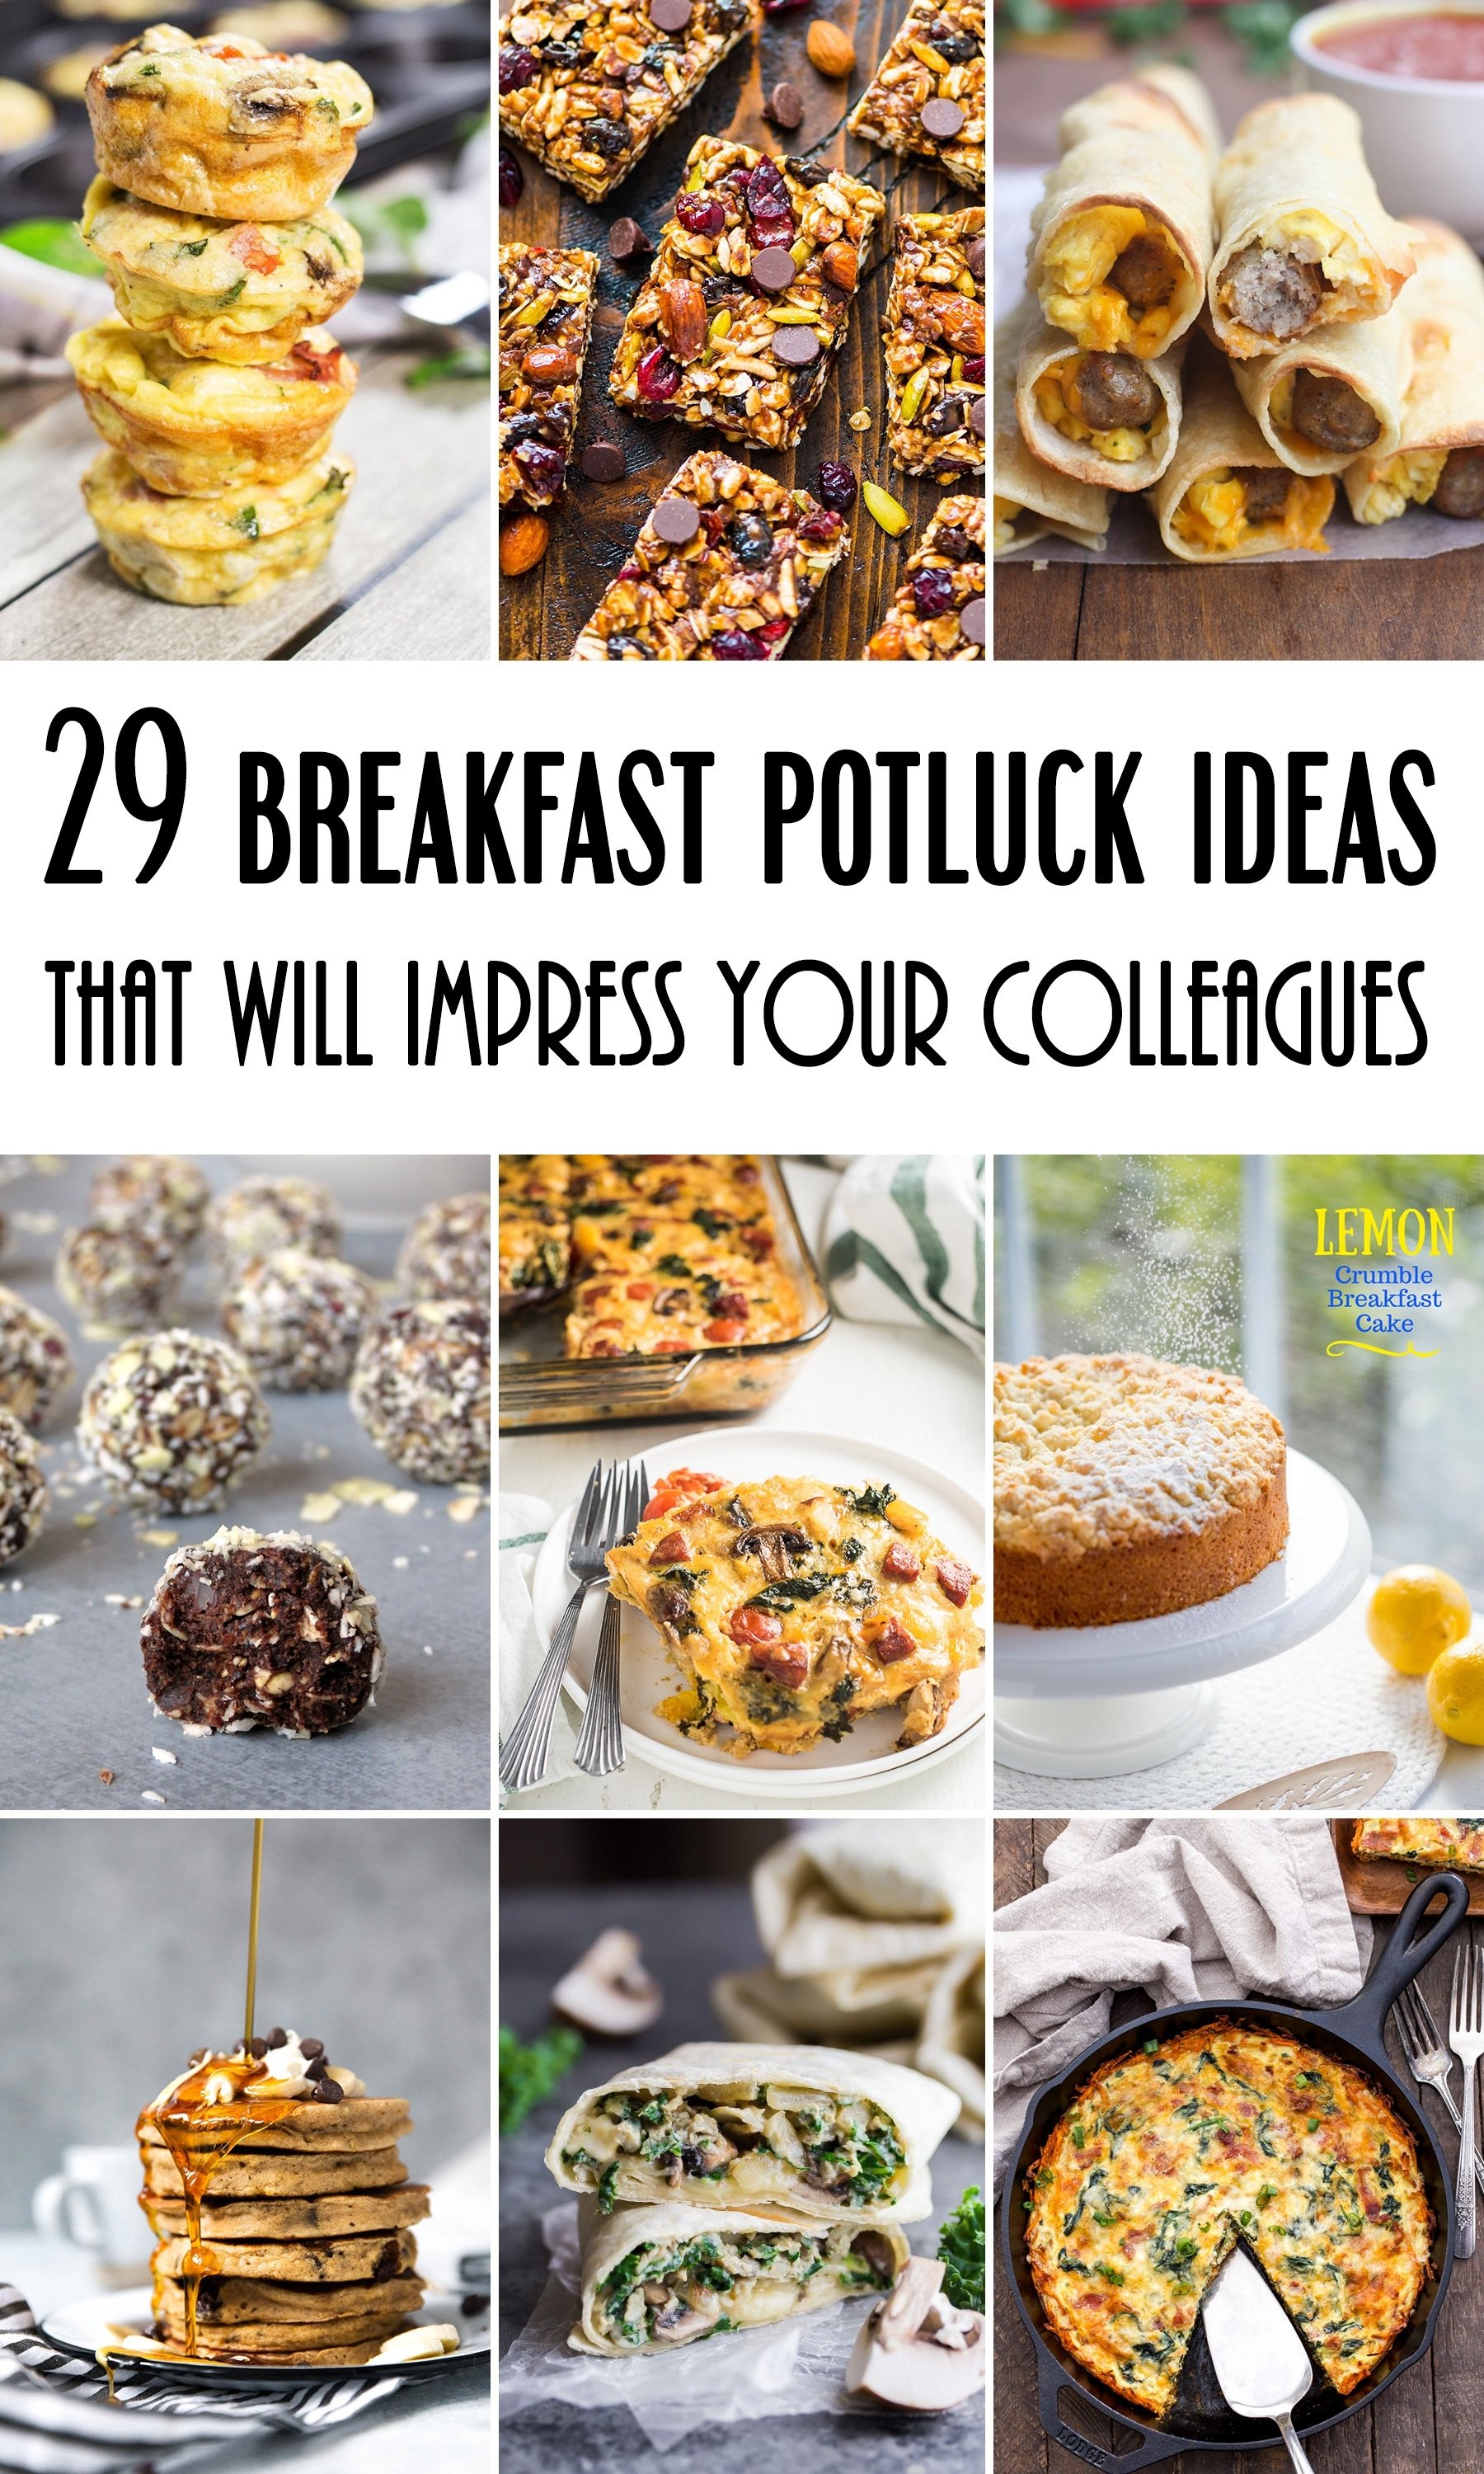 10-lovable-potluck-ideas-for-work-party-2023